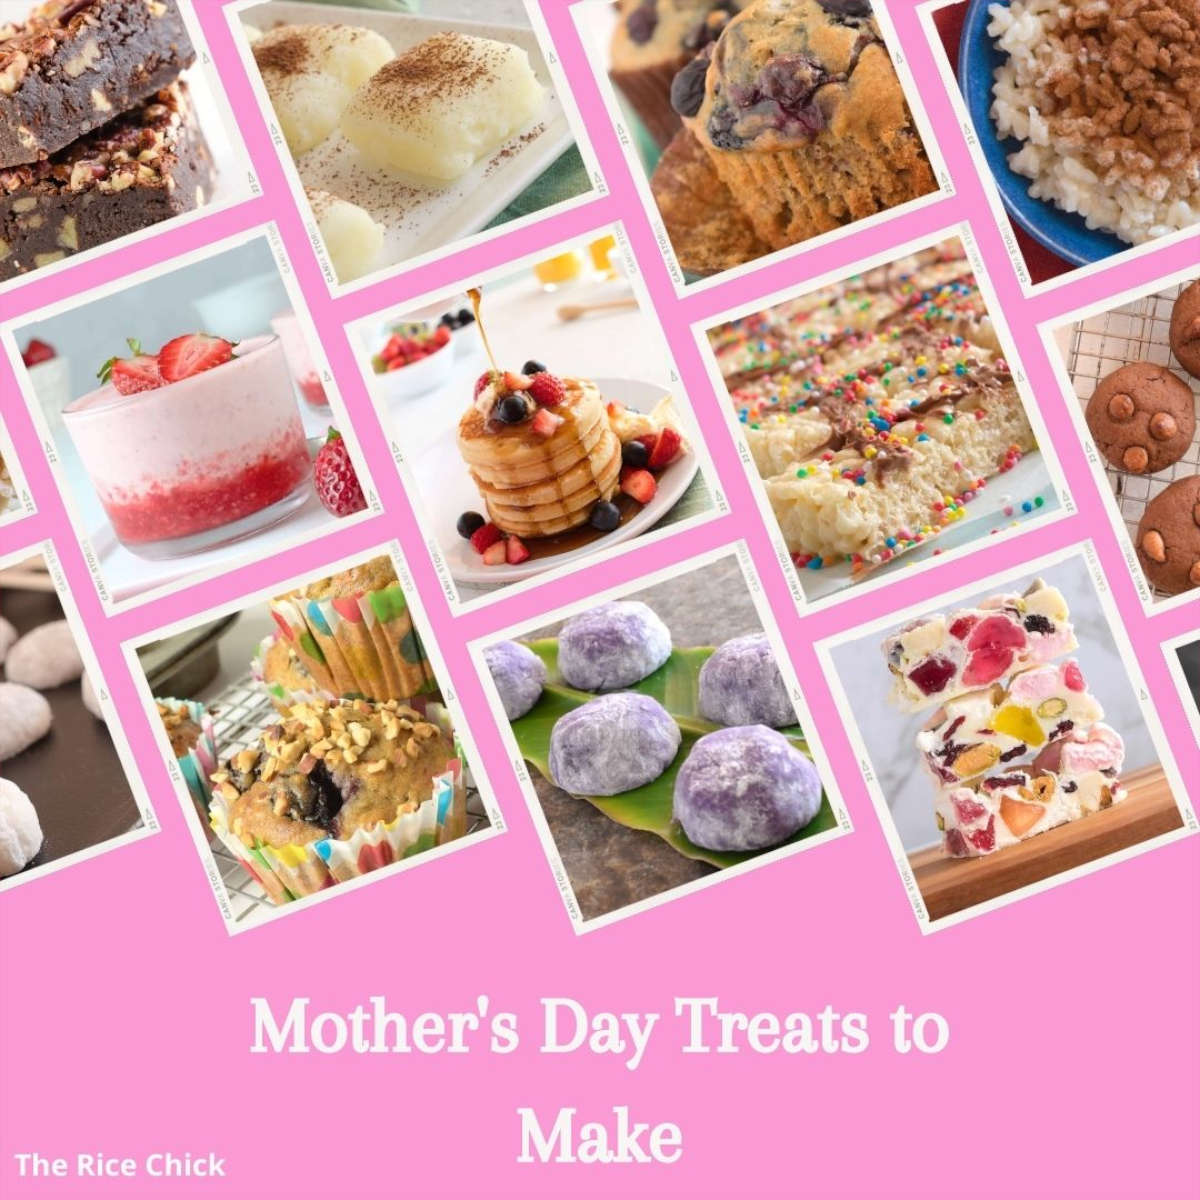 Collage of mother's day treats to make.